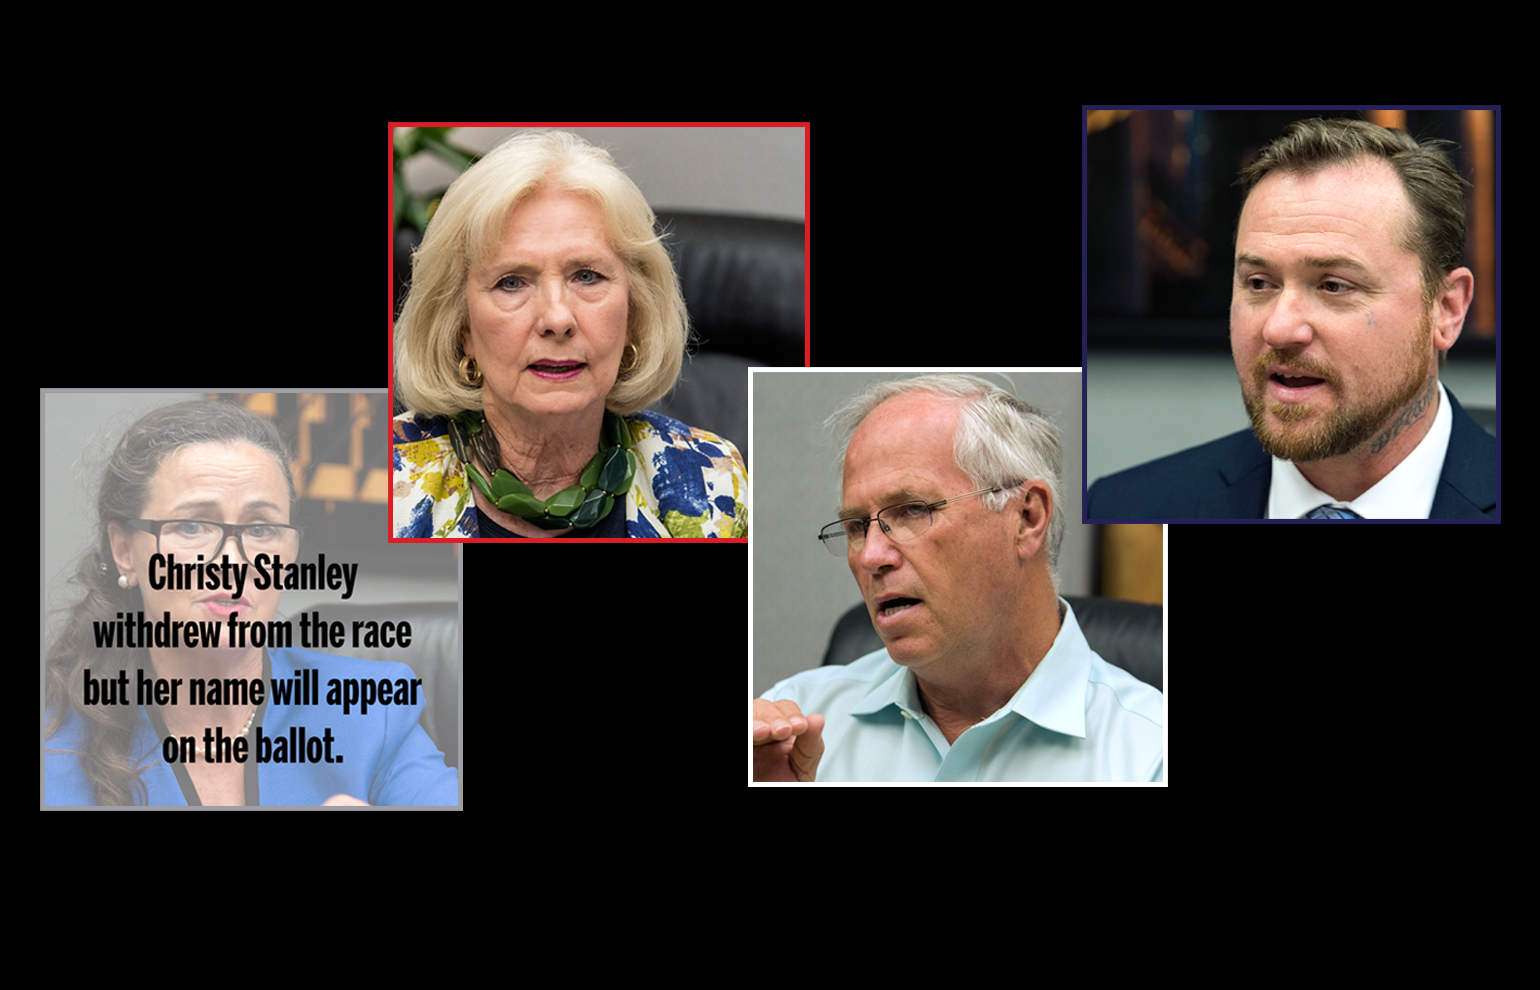 Clark County Council Chair candidates, clockwise from top left, Eileen Quiring, Eric Holt, incumbent Marc Boldt, and Christy Stanley, who officially withdrew from the race.